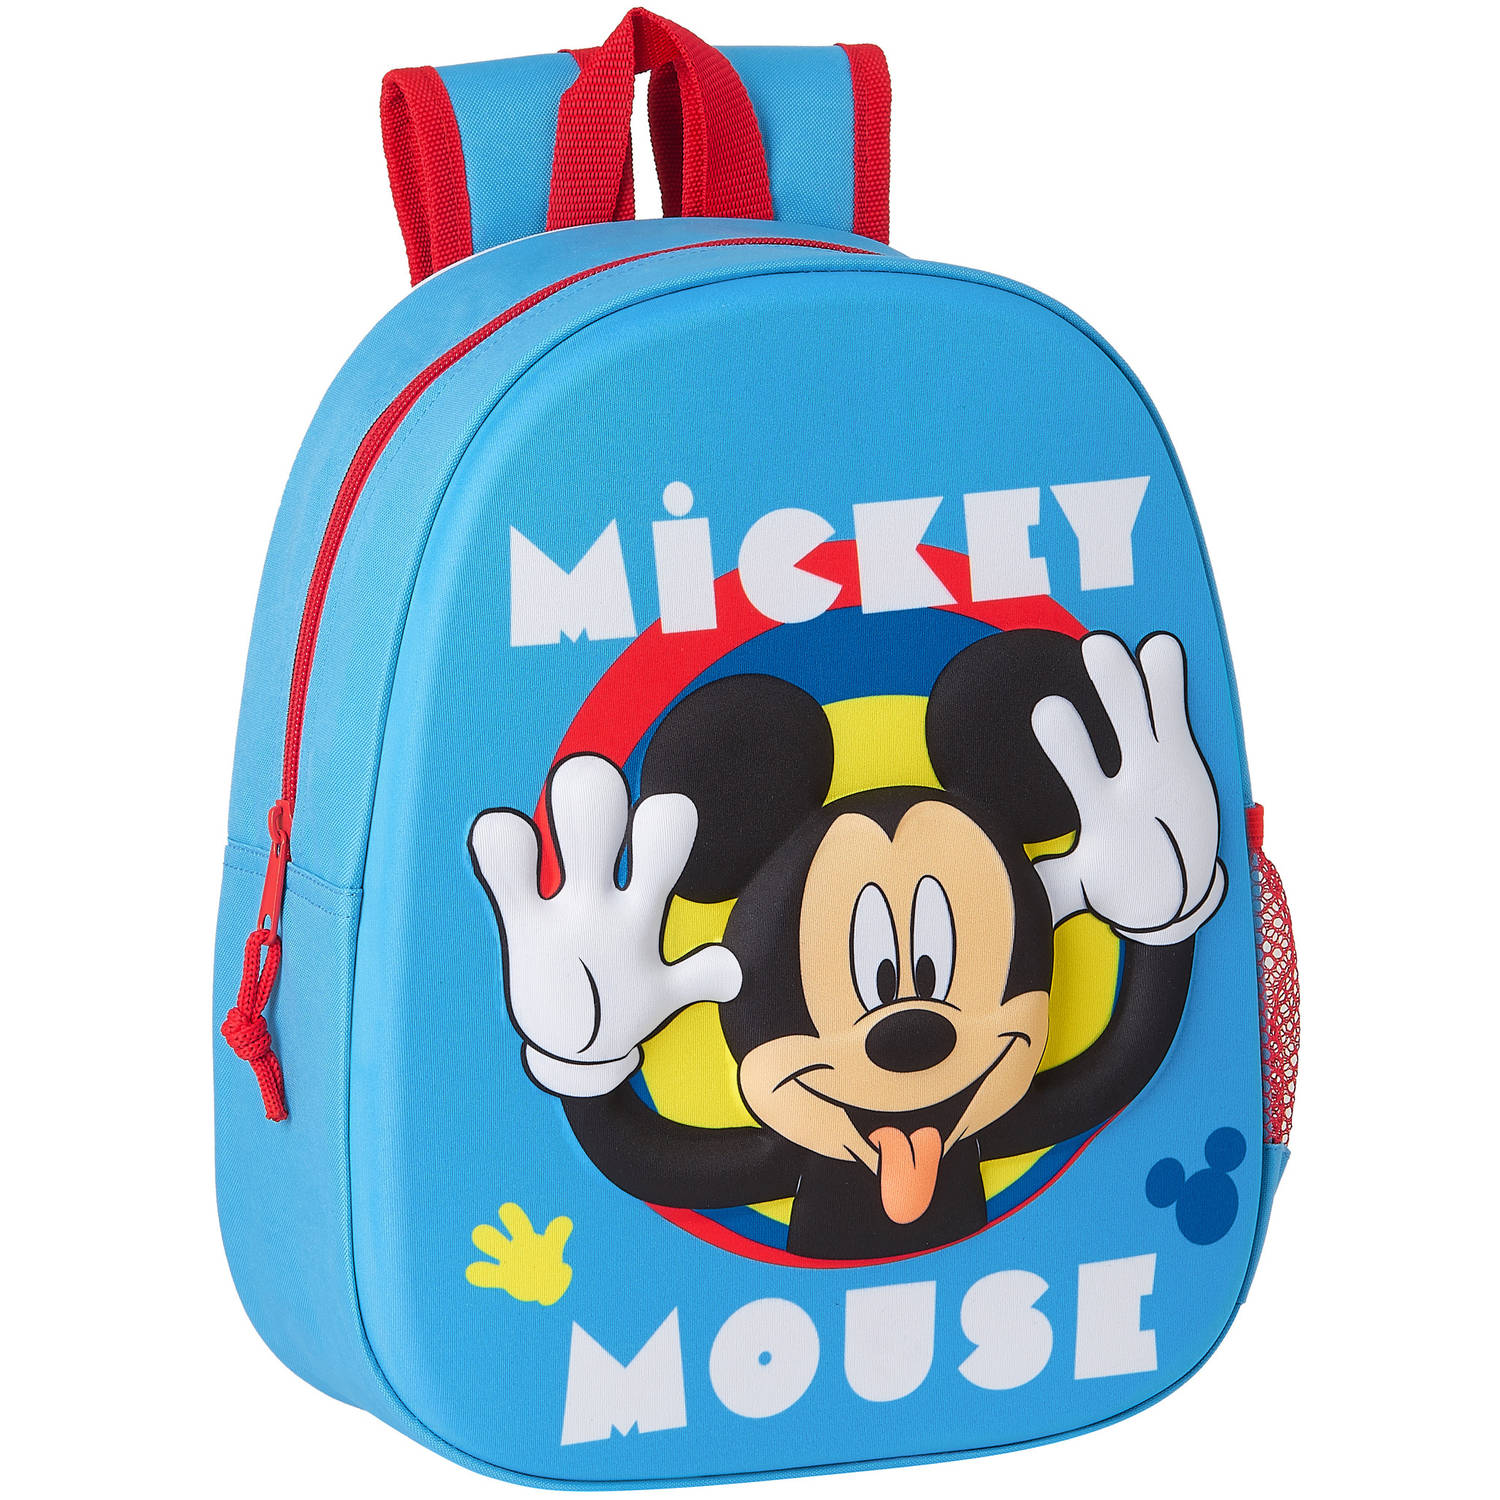 Disney Mickey Mouse Rugzak 3d Funny 33 X 27 X 10 Cm Polyester